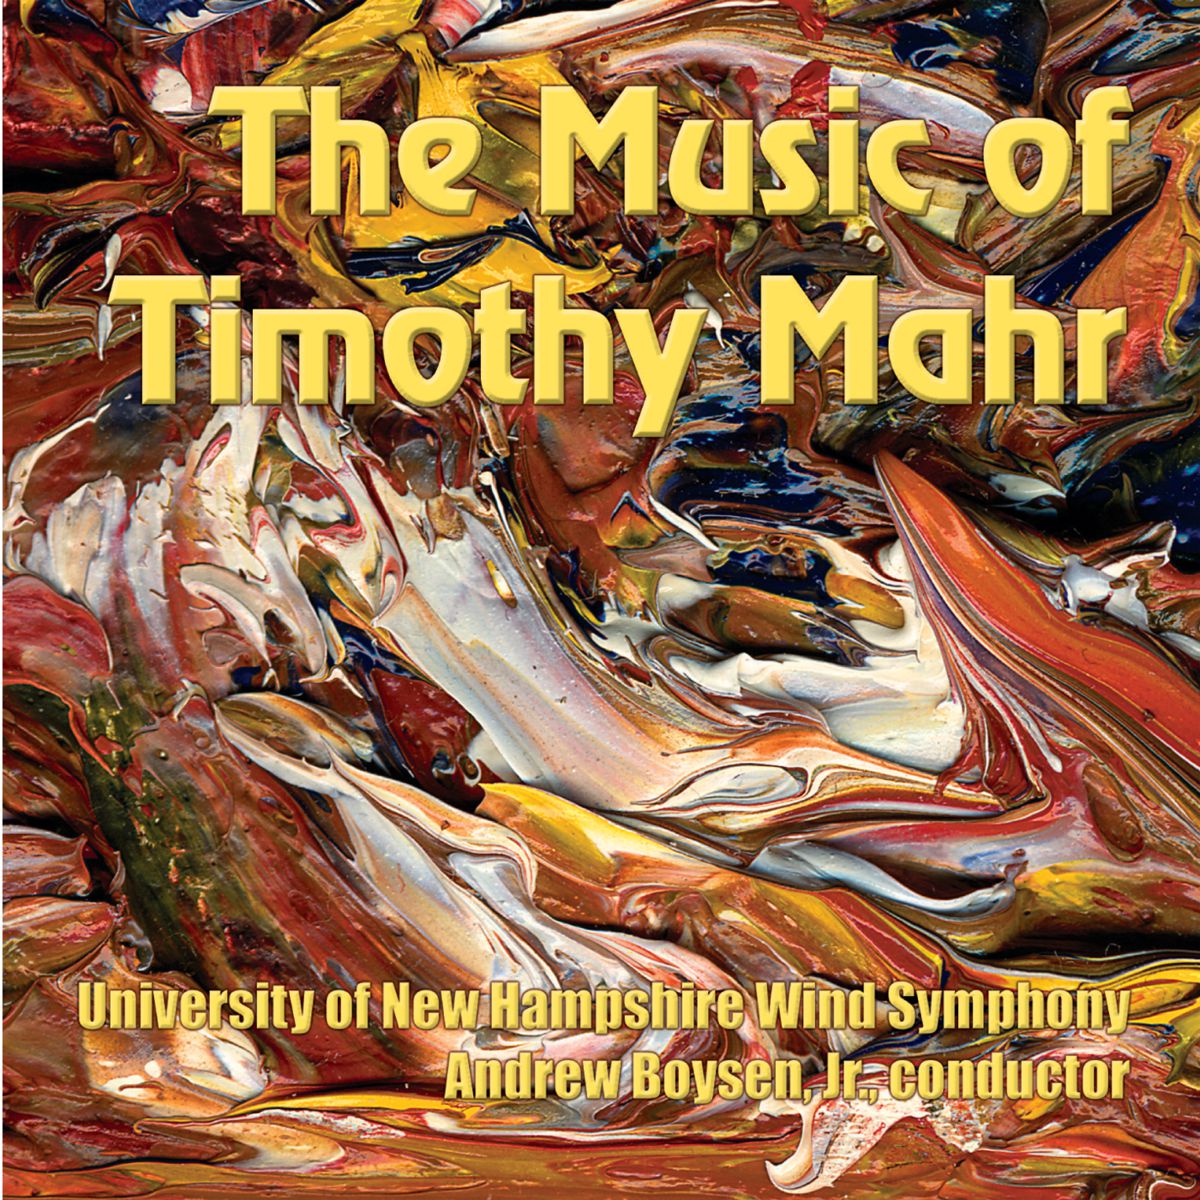 Music of Timothy Mahr, The - cliquer ici